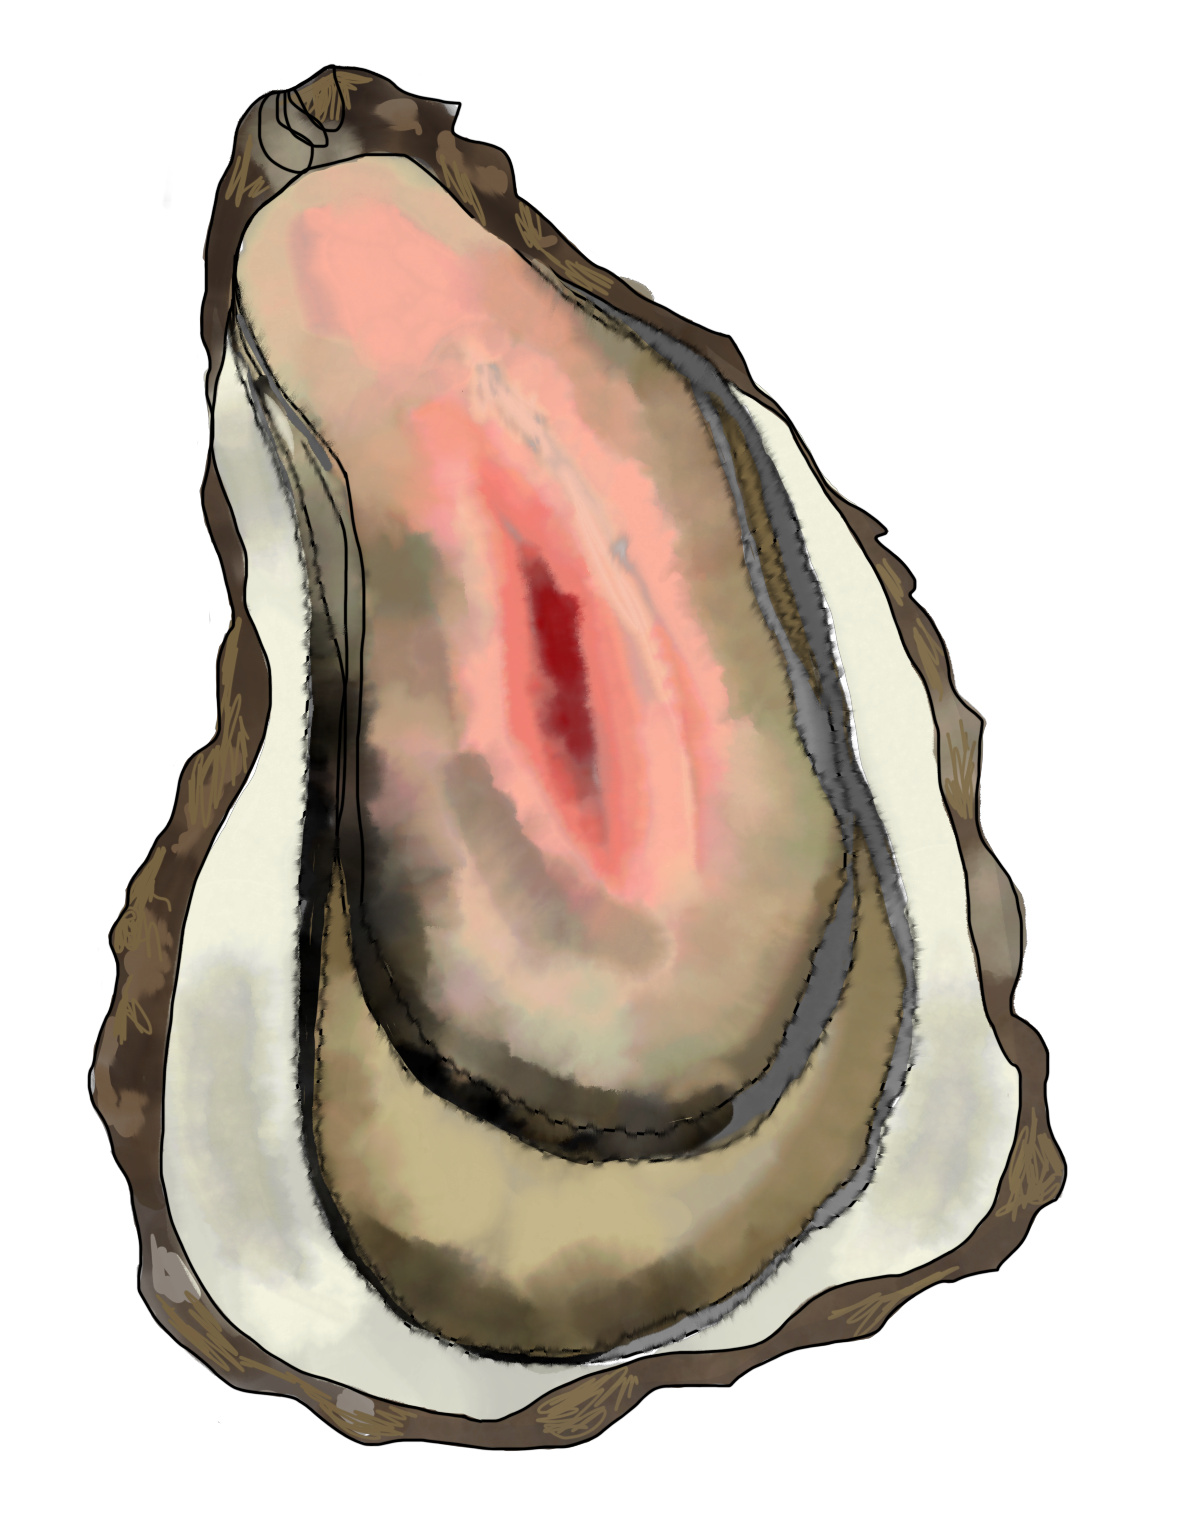 An Oysters Burden picture image